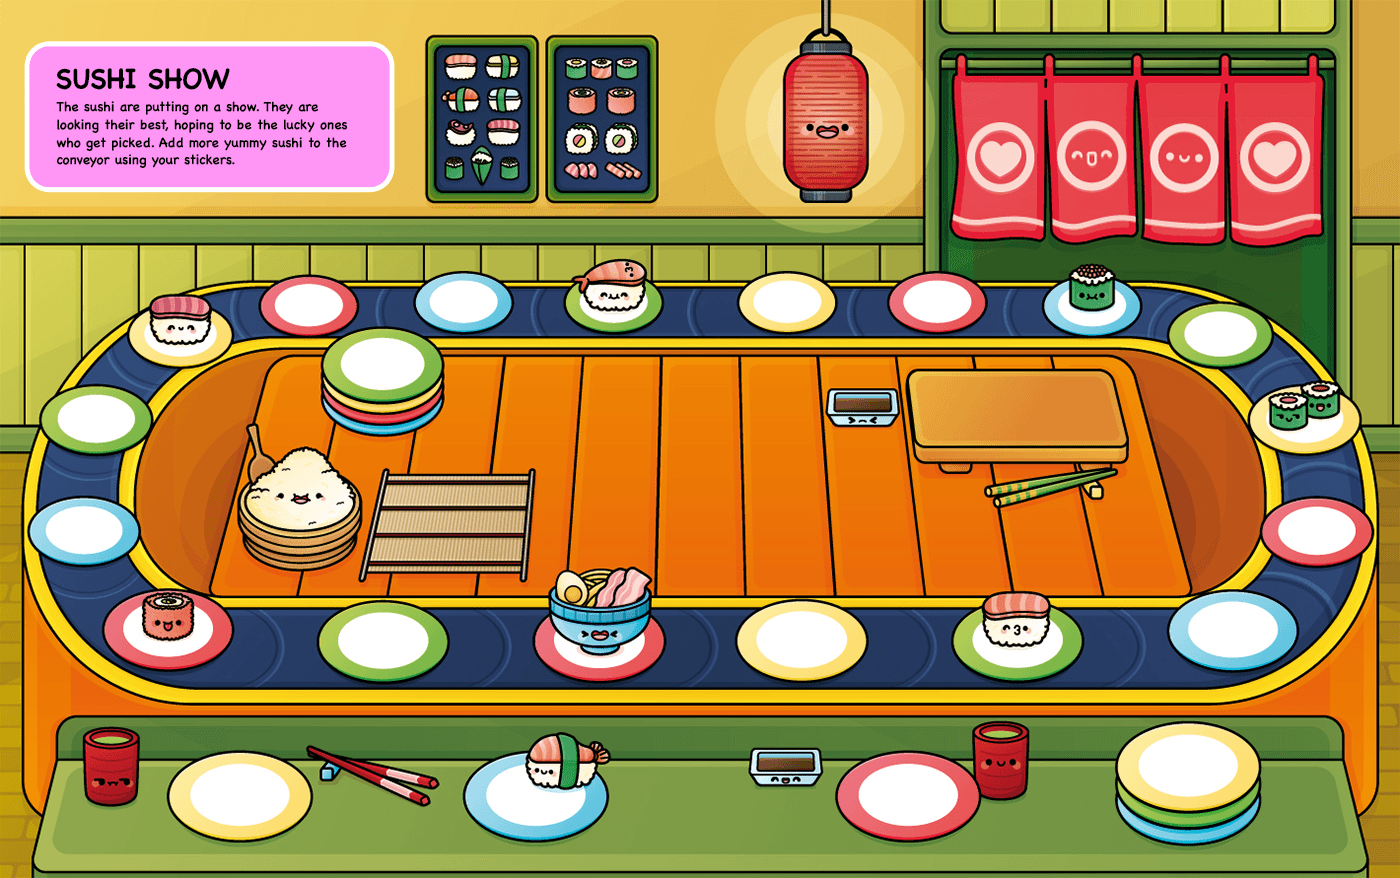 Double page showcasing a Japanese restaurant with cute and kawaii stickers featuring delicious food.